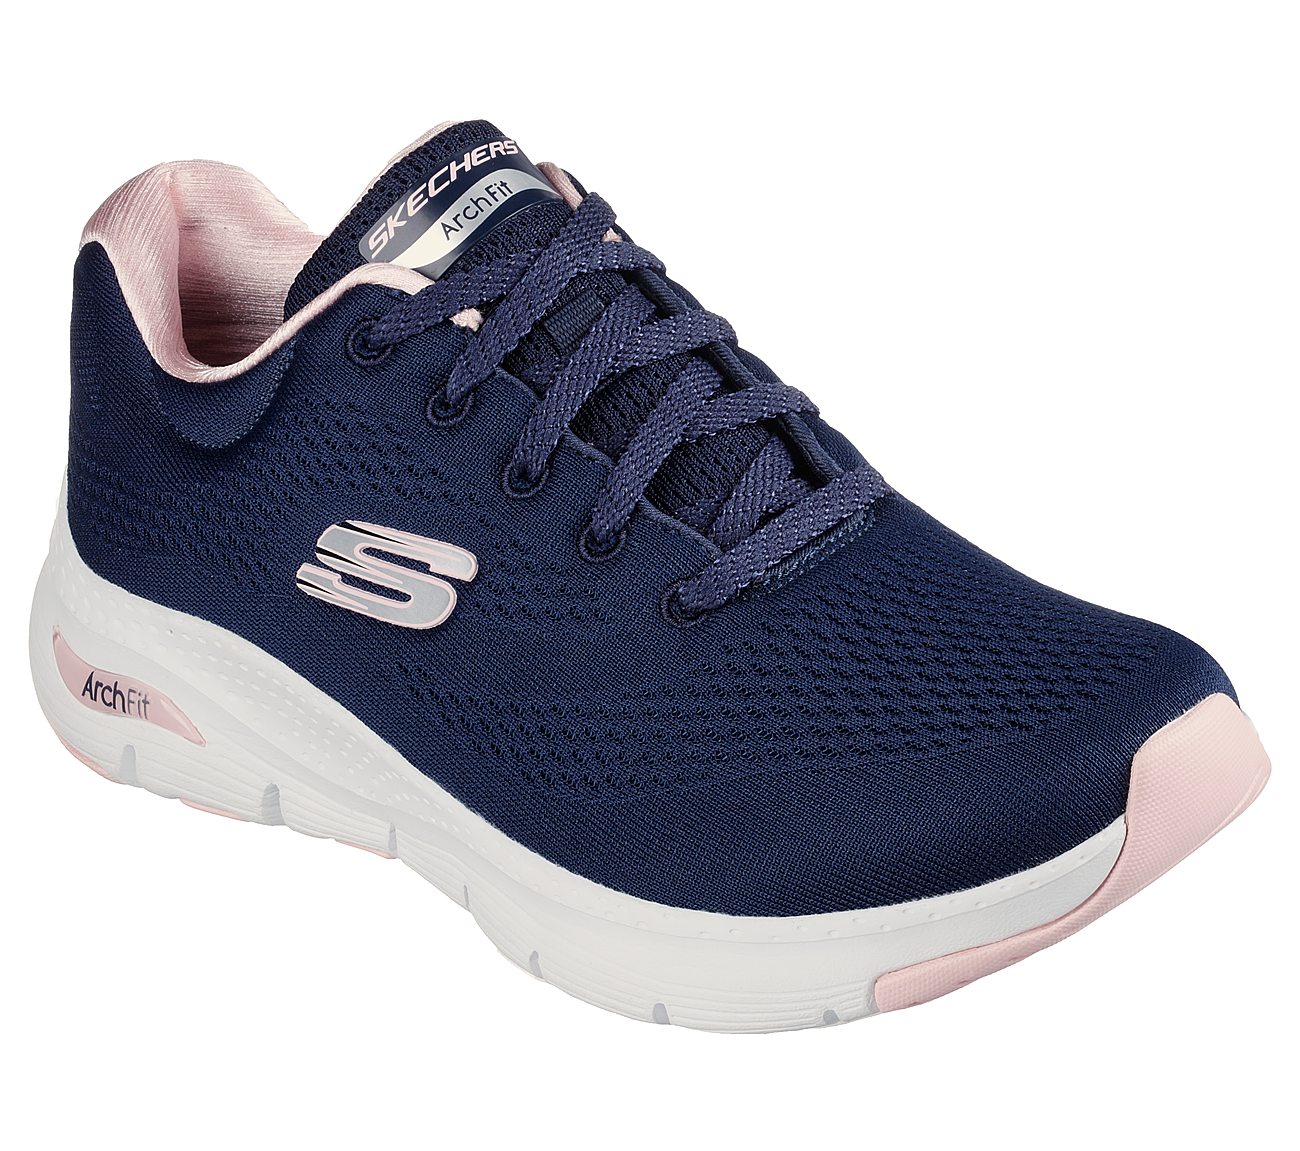 ARCH FIT - BIG APPEAL, NAVY/PINK Footwear Lateral View